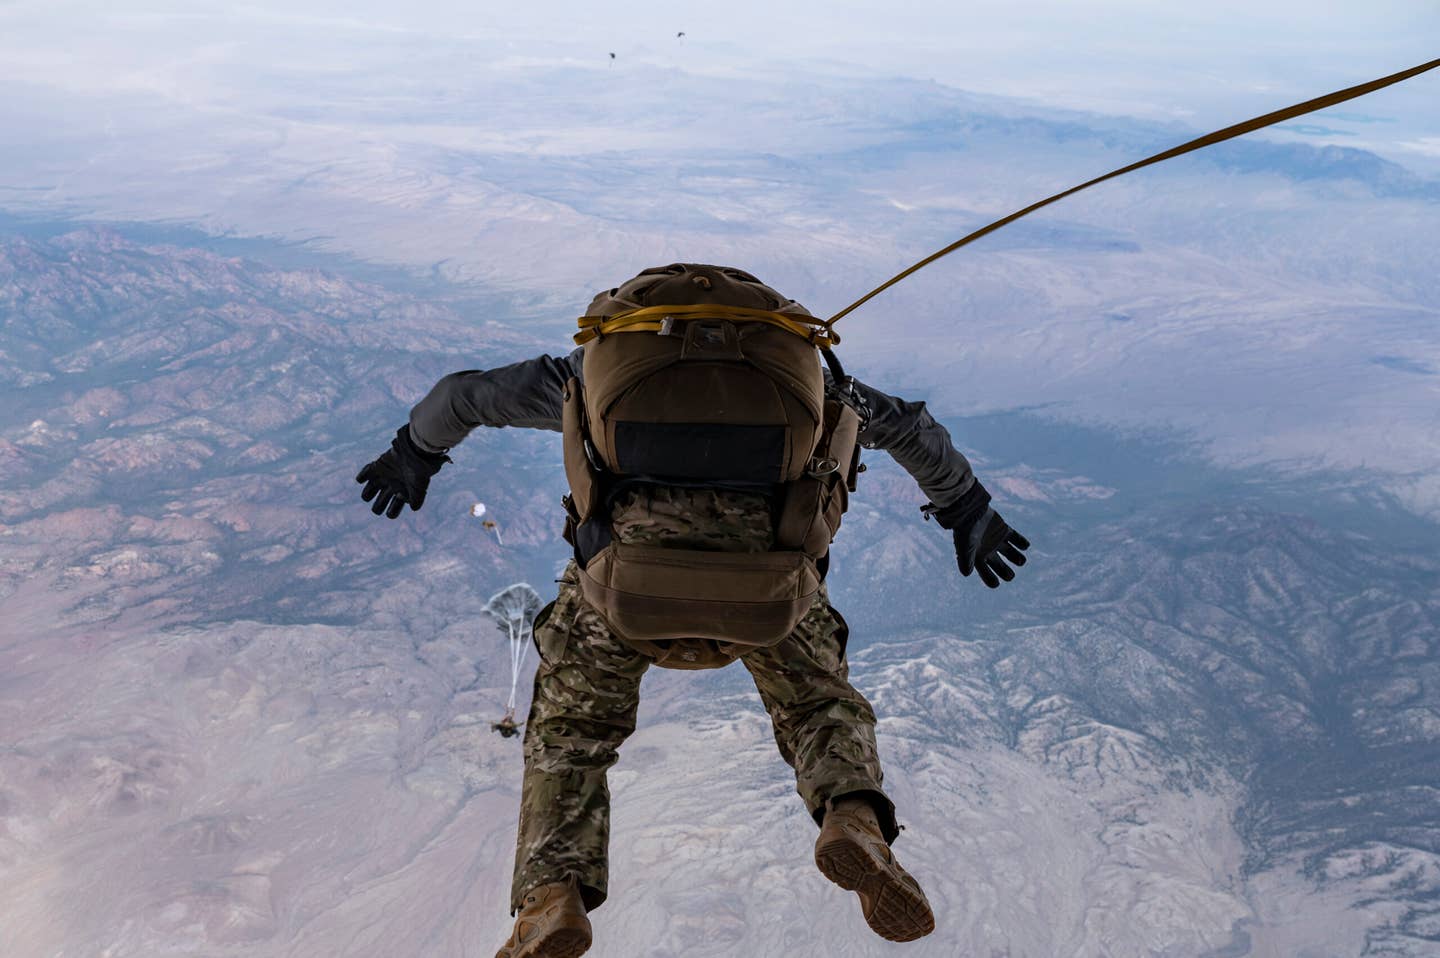 Tech. Sgt. Michael Valeich, 413th Flight Test Squadron Detachment 1 operator, exits the back of a HC-130J Combat King II to conduct a High-Altitude High-Opening (HAHO) jump during a Black Flag 22-1 training mission over the Nevada Test and Training Range, Nevada. <em>U.S. Air Force photo by Tech. Sgt. Alexandre Montes</em>